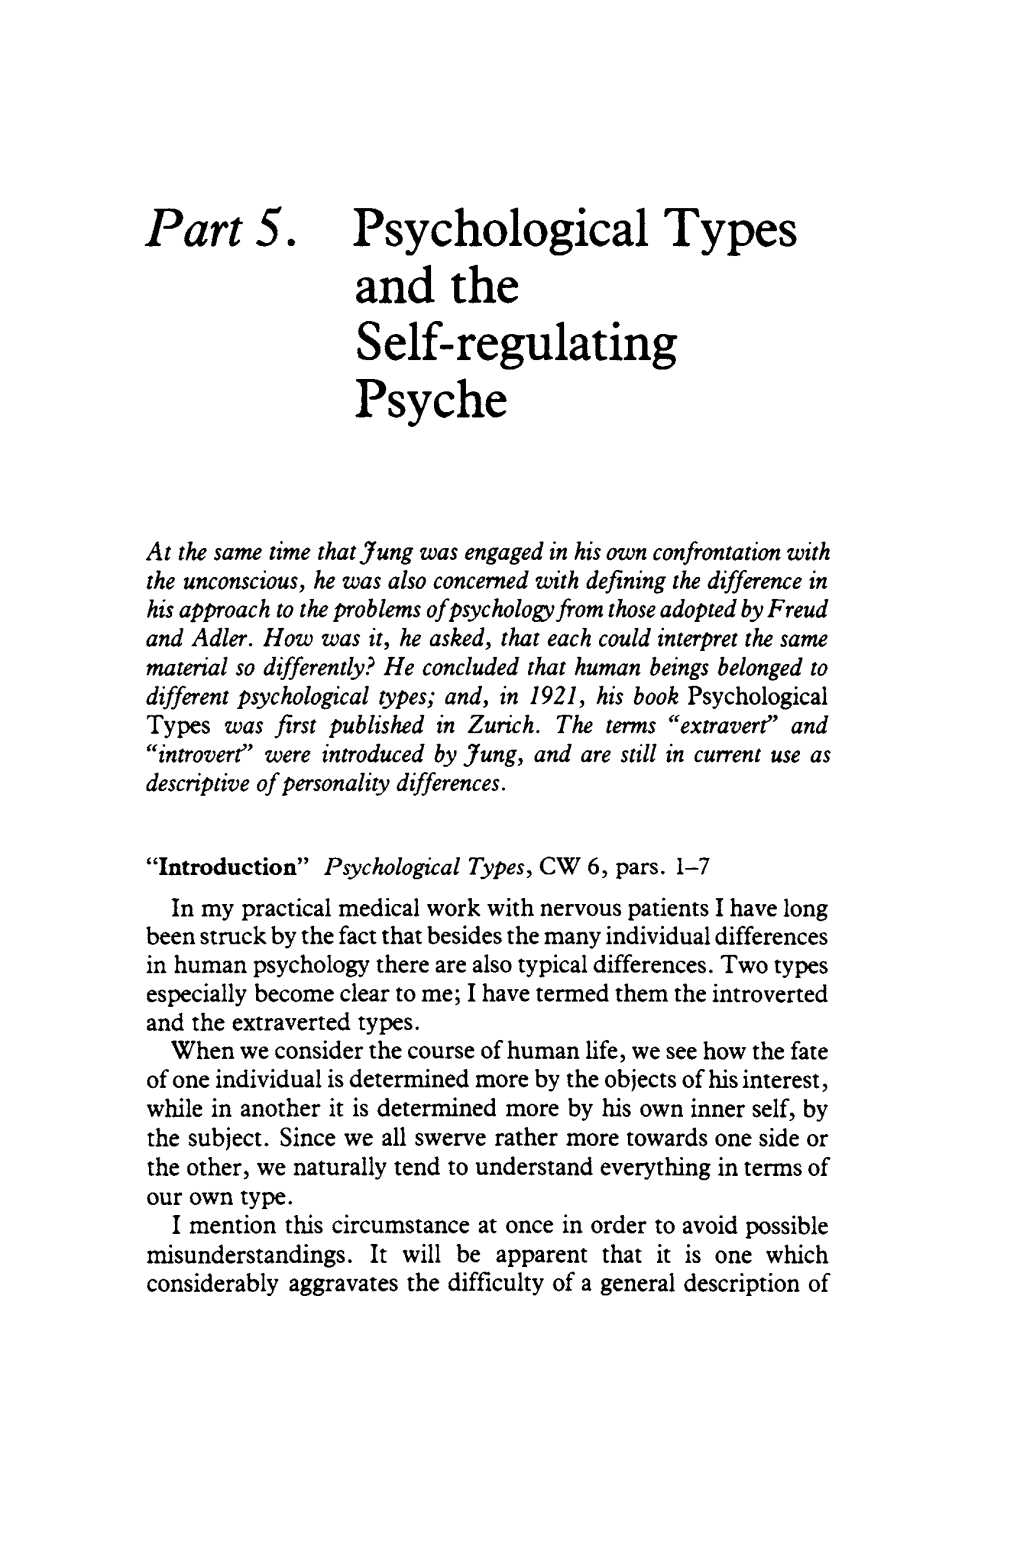 Part 5. Psychological Types and the Self-Regulating Psyche